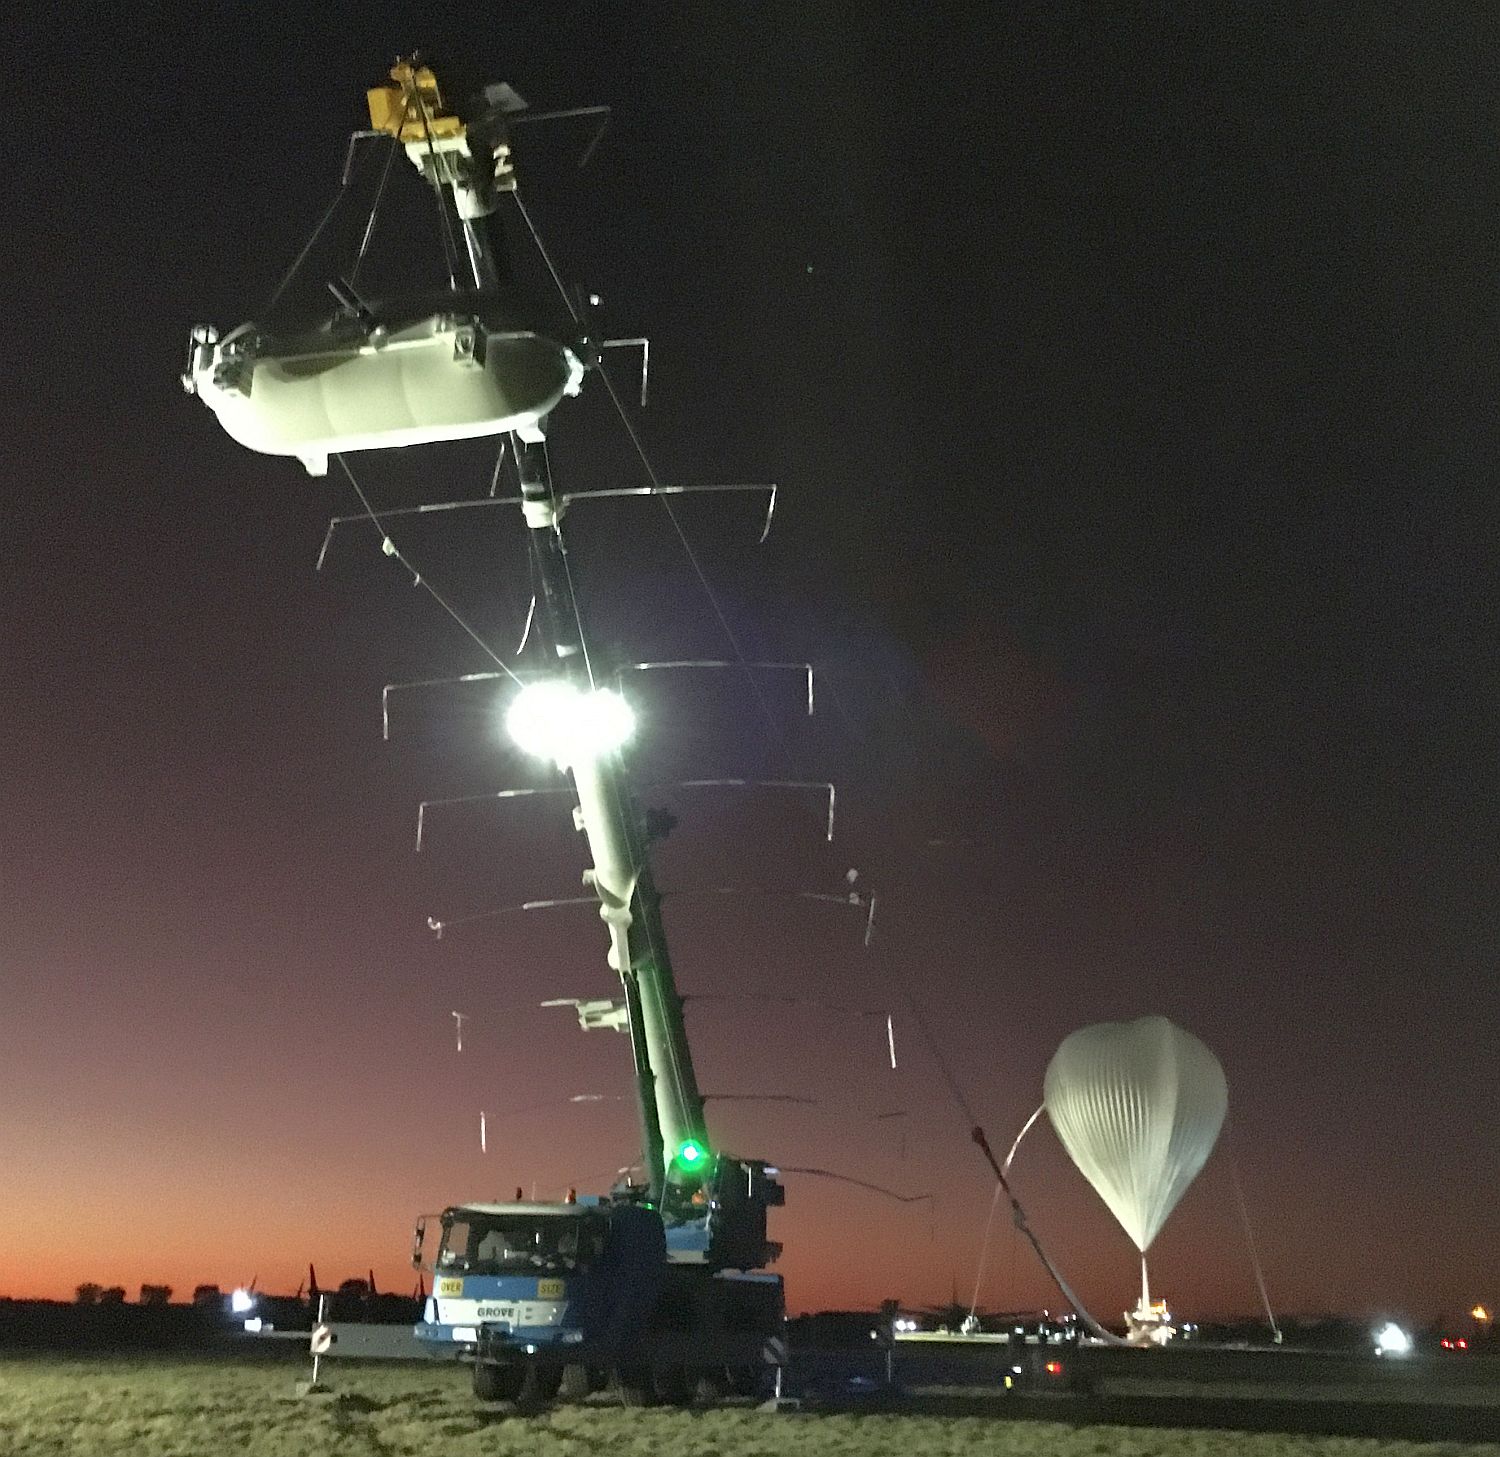 The launch vehicle hoisting the GRAINE instrument. Inthe background, the balloon still being inflated.